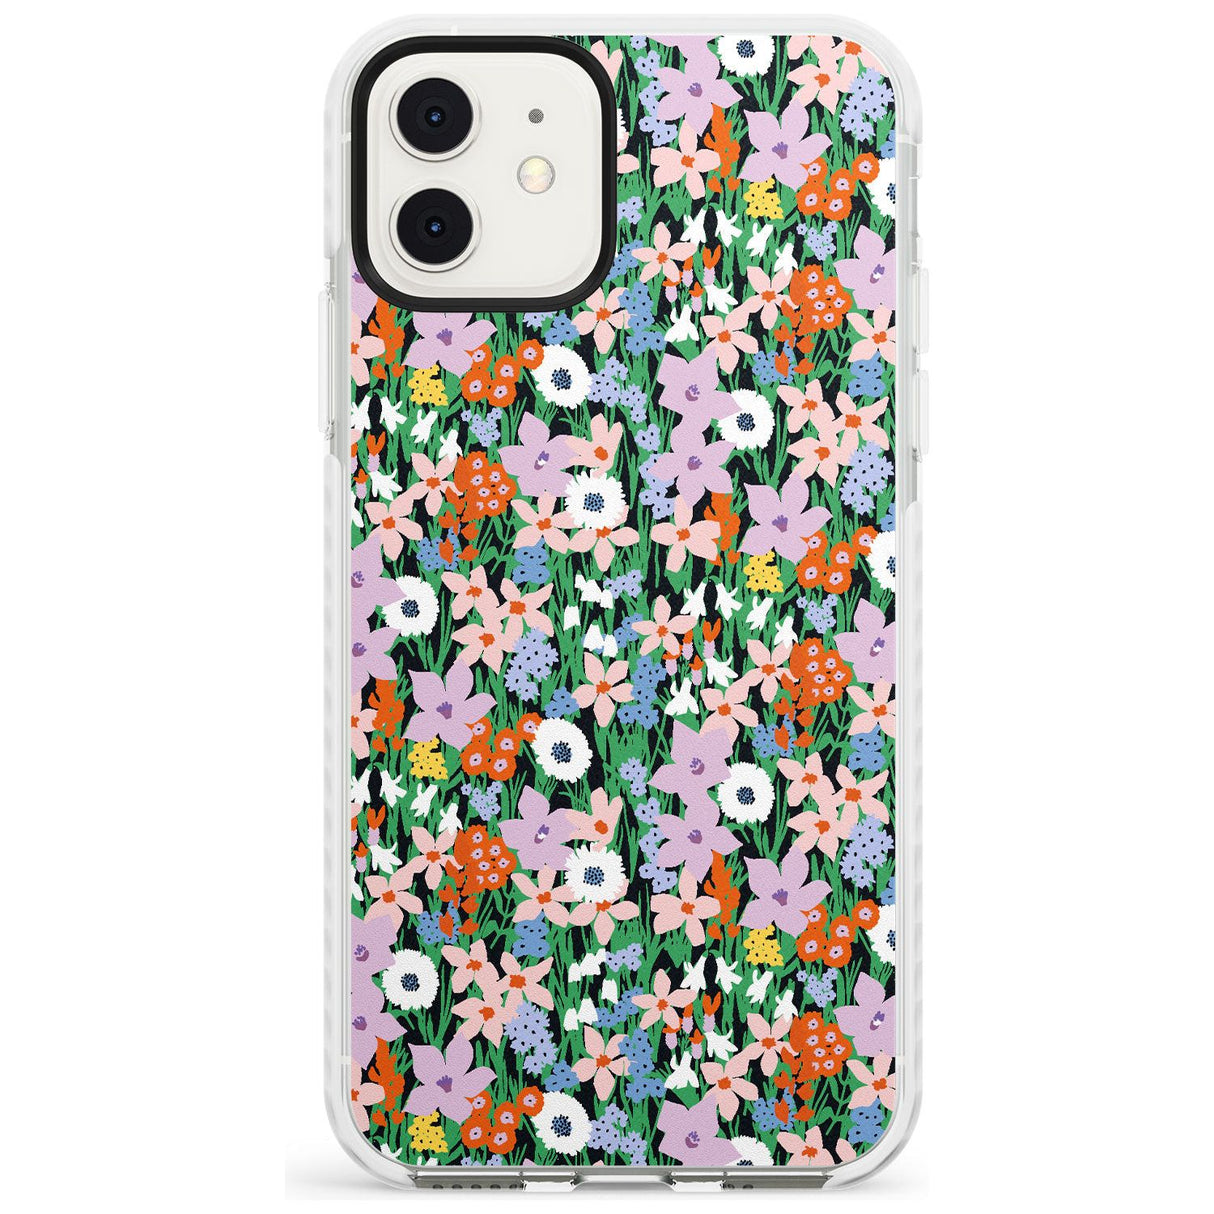 Jazzy Floral Mix: Solid Slim TPU Phone Case for iPhone 11